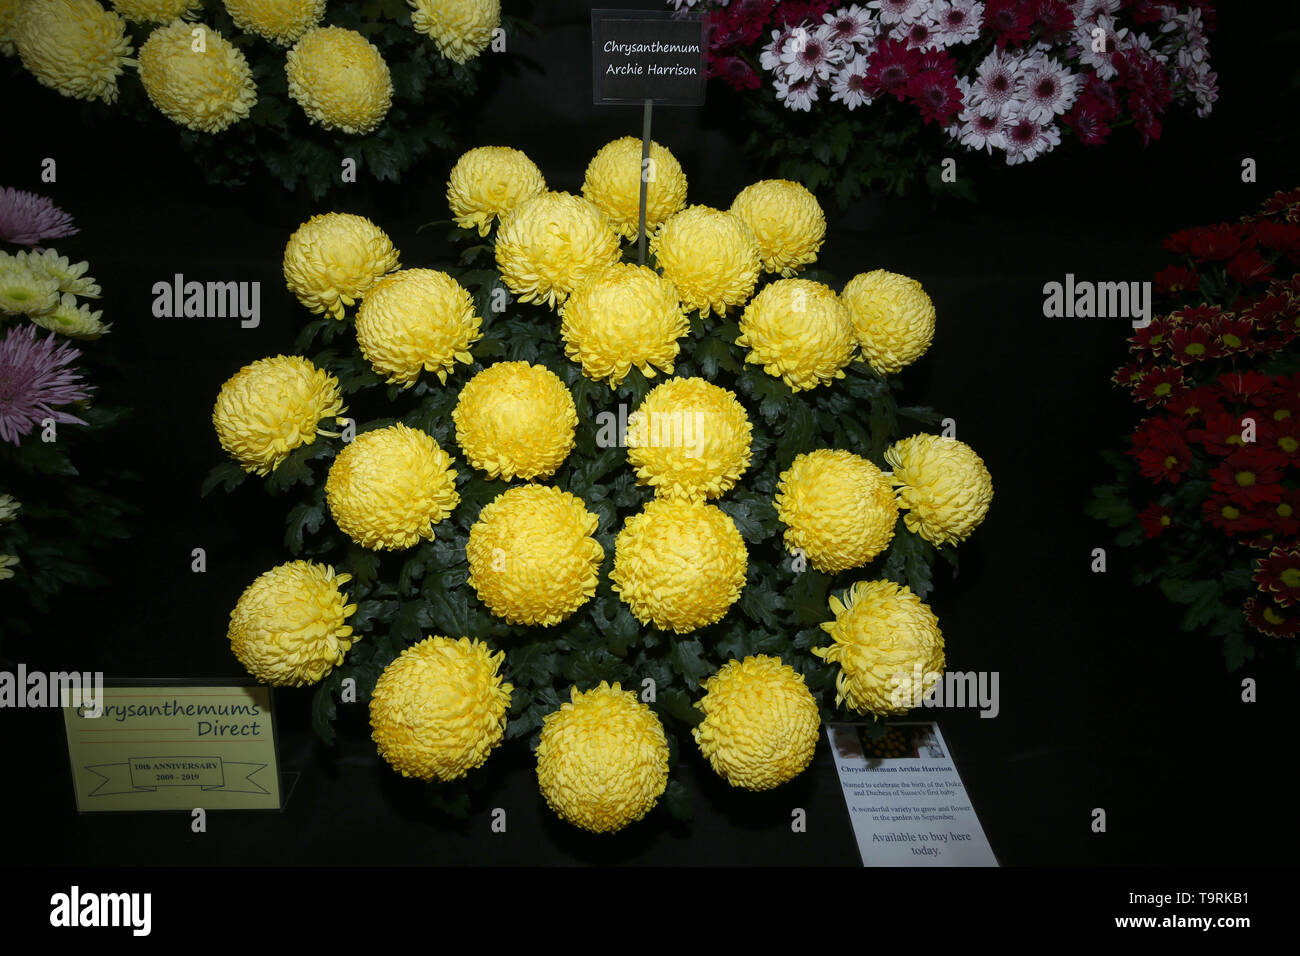 Chrysanthemum Archie Harrison, named to celebrate the birth of the the Duke and Duchess of Sussex first child, on display at the RHS Chelsea Flower Show at the Royal Hospital Chelsea, London. Stock Photo